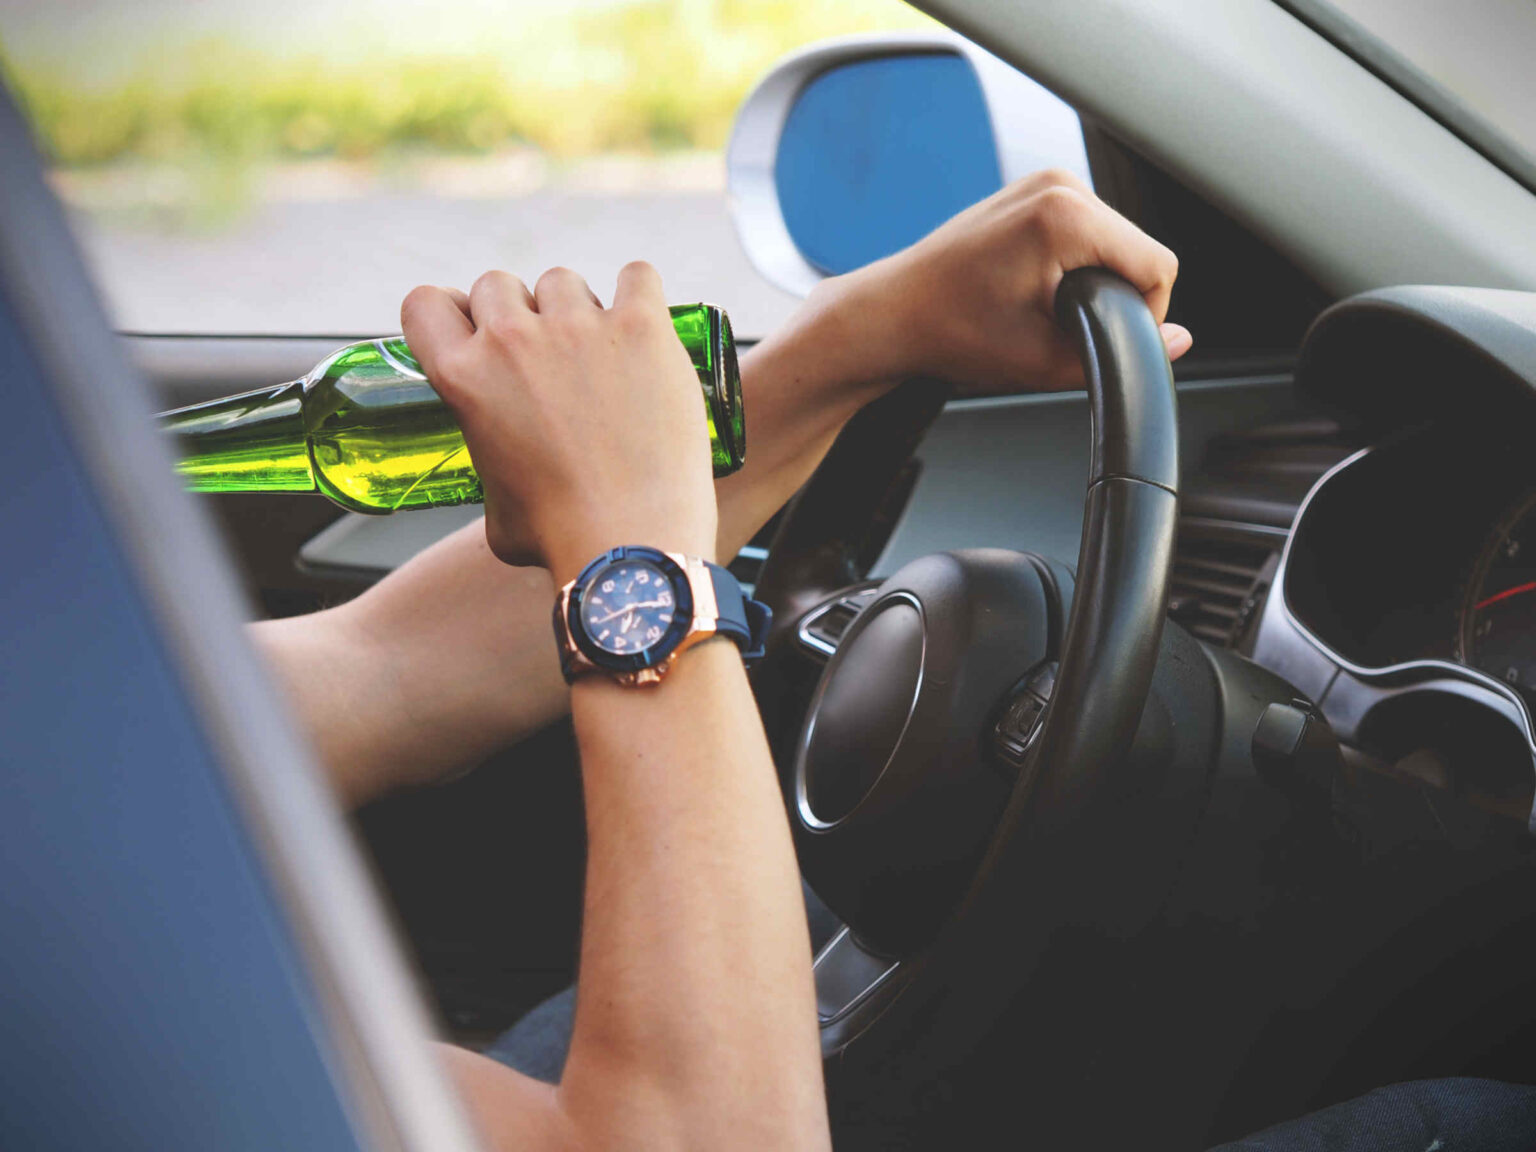 Whether you're drunk or high, it's never a good idea to drive under the influence. Here are some of the consequences you may face for a DUI.